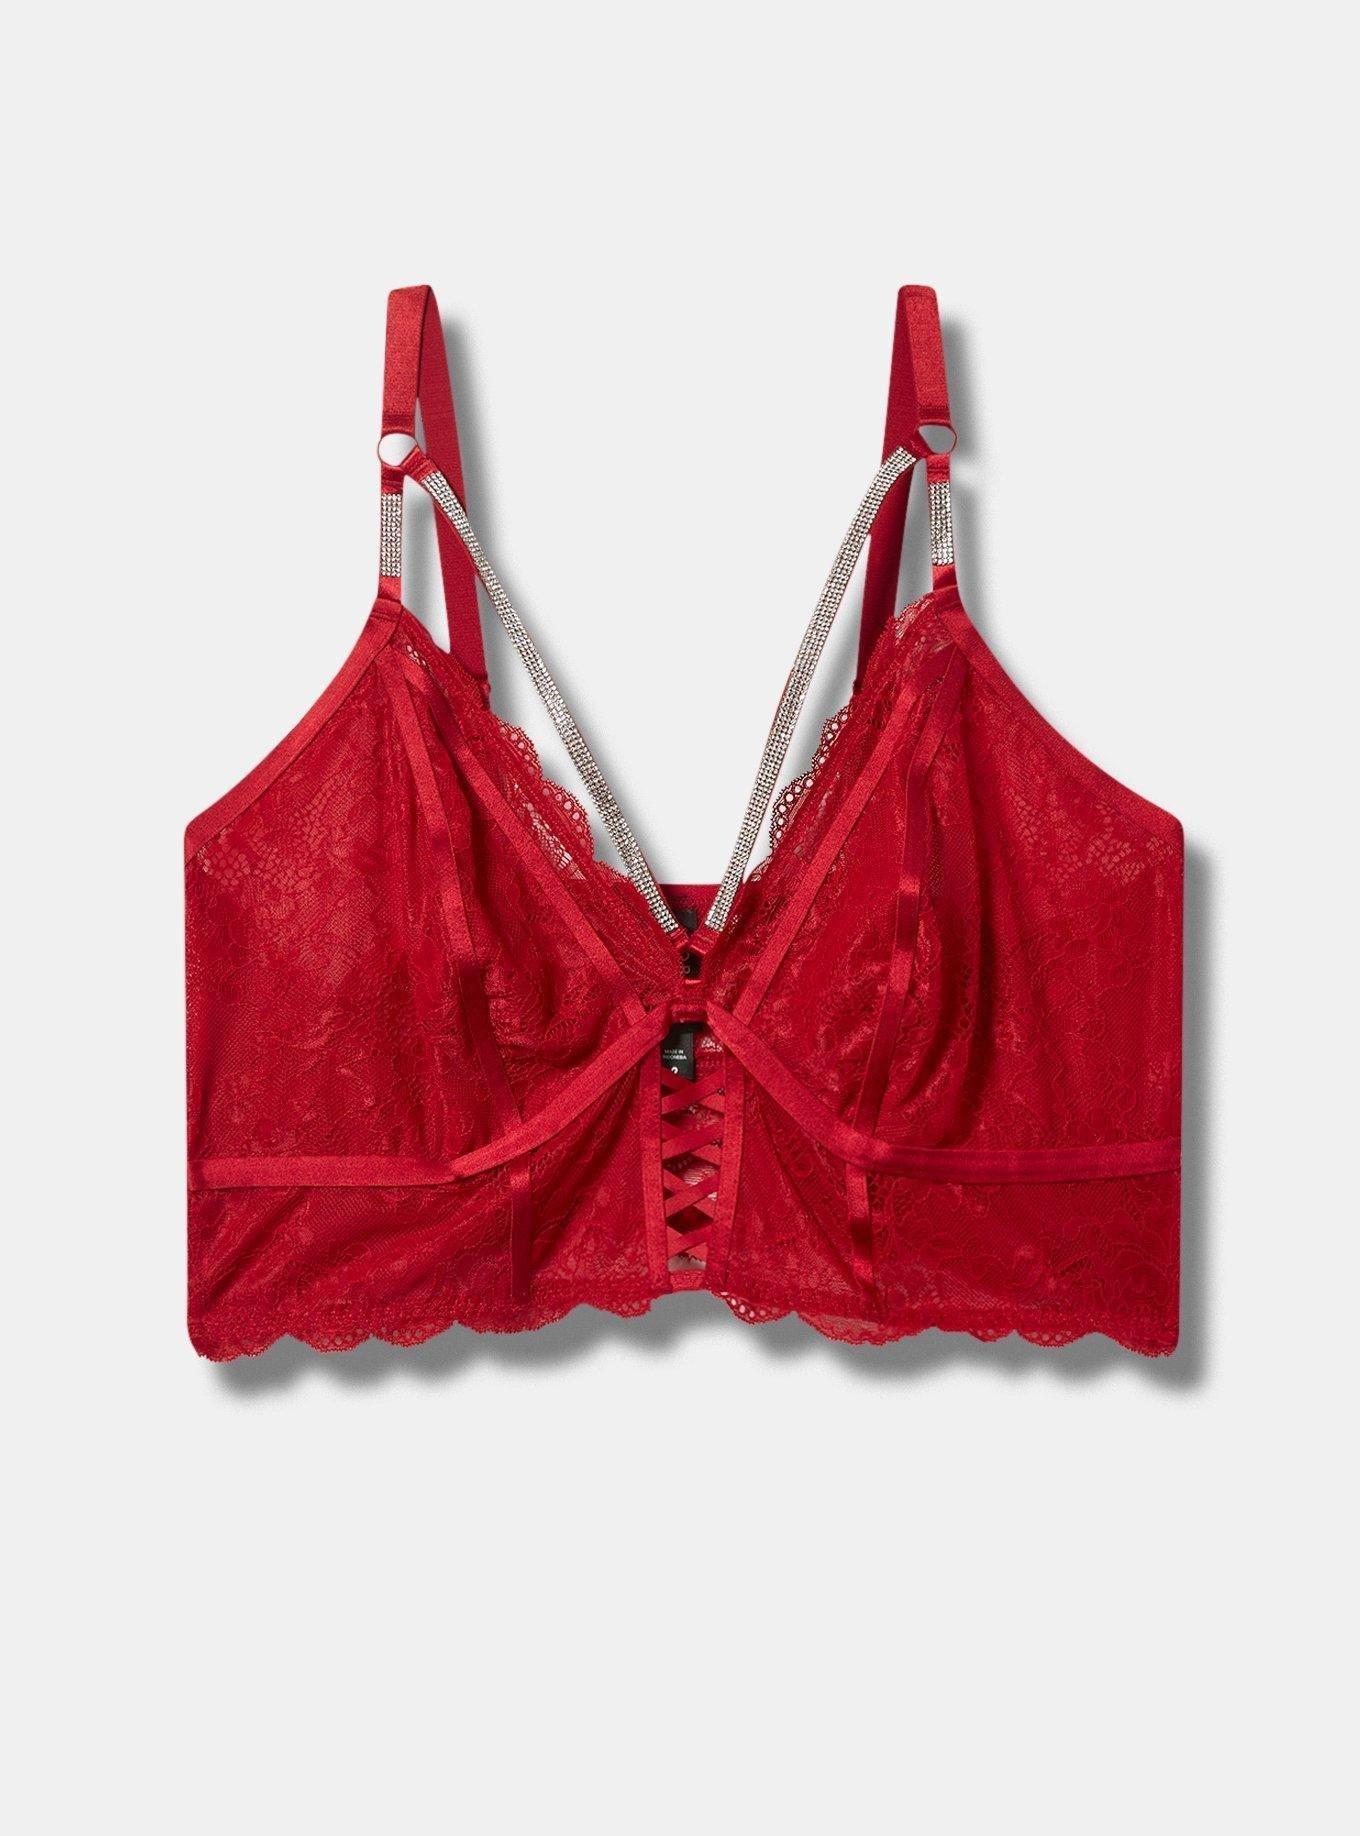 Lounge Underwear - Get your hands on our Red Triangle Set ❤️ A